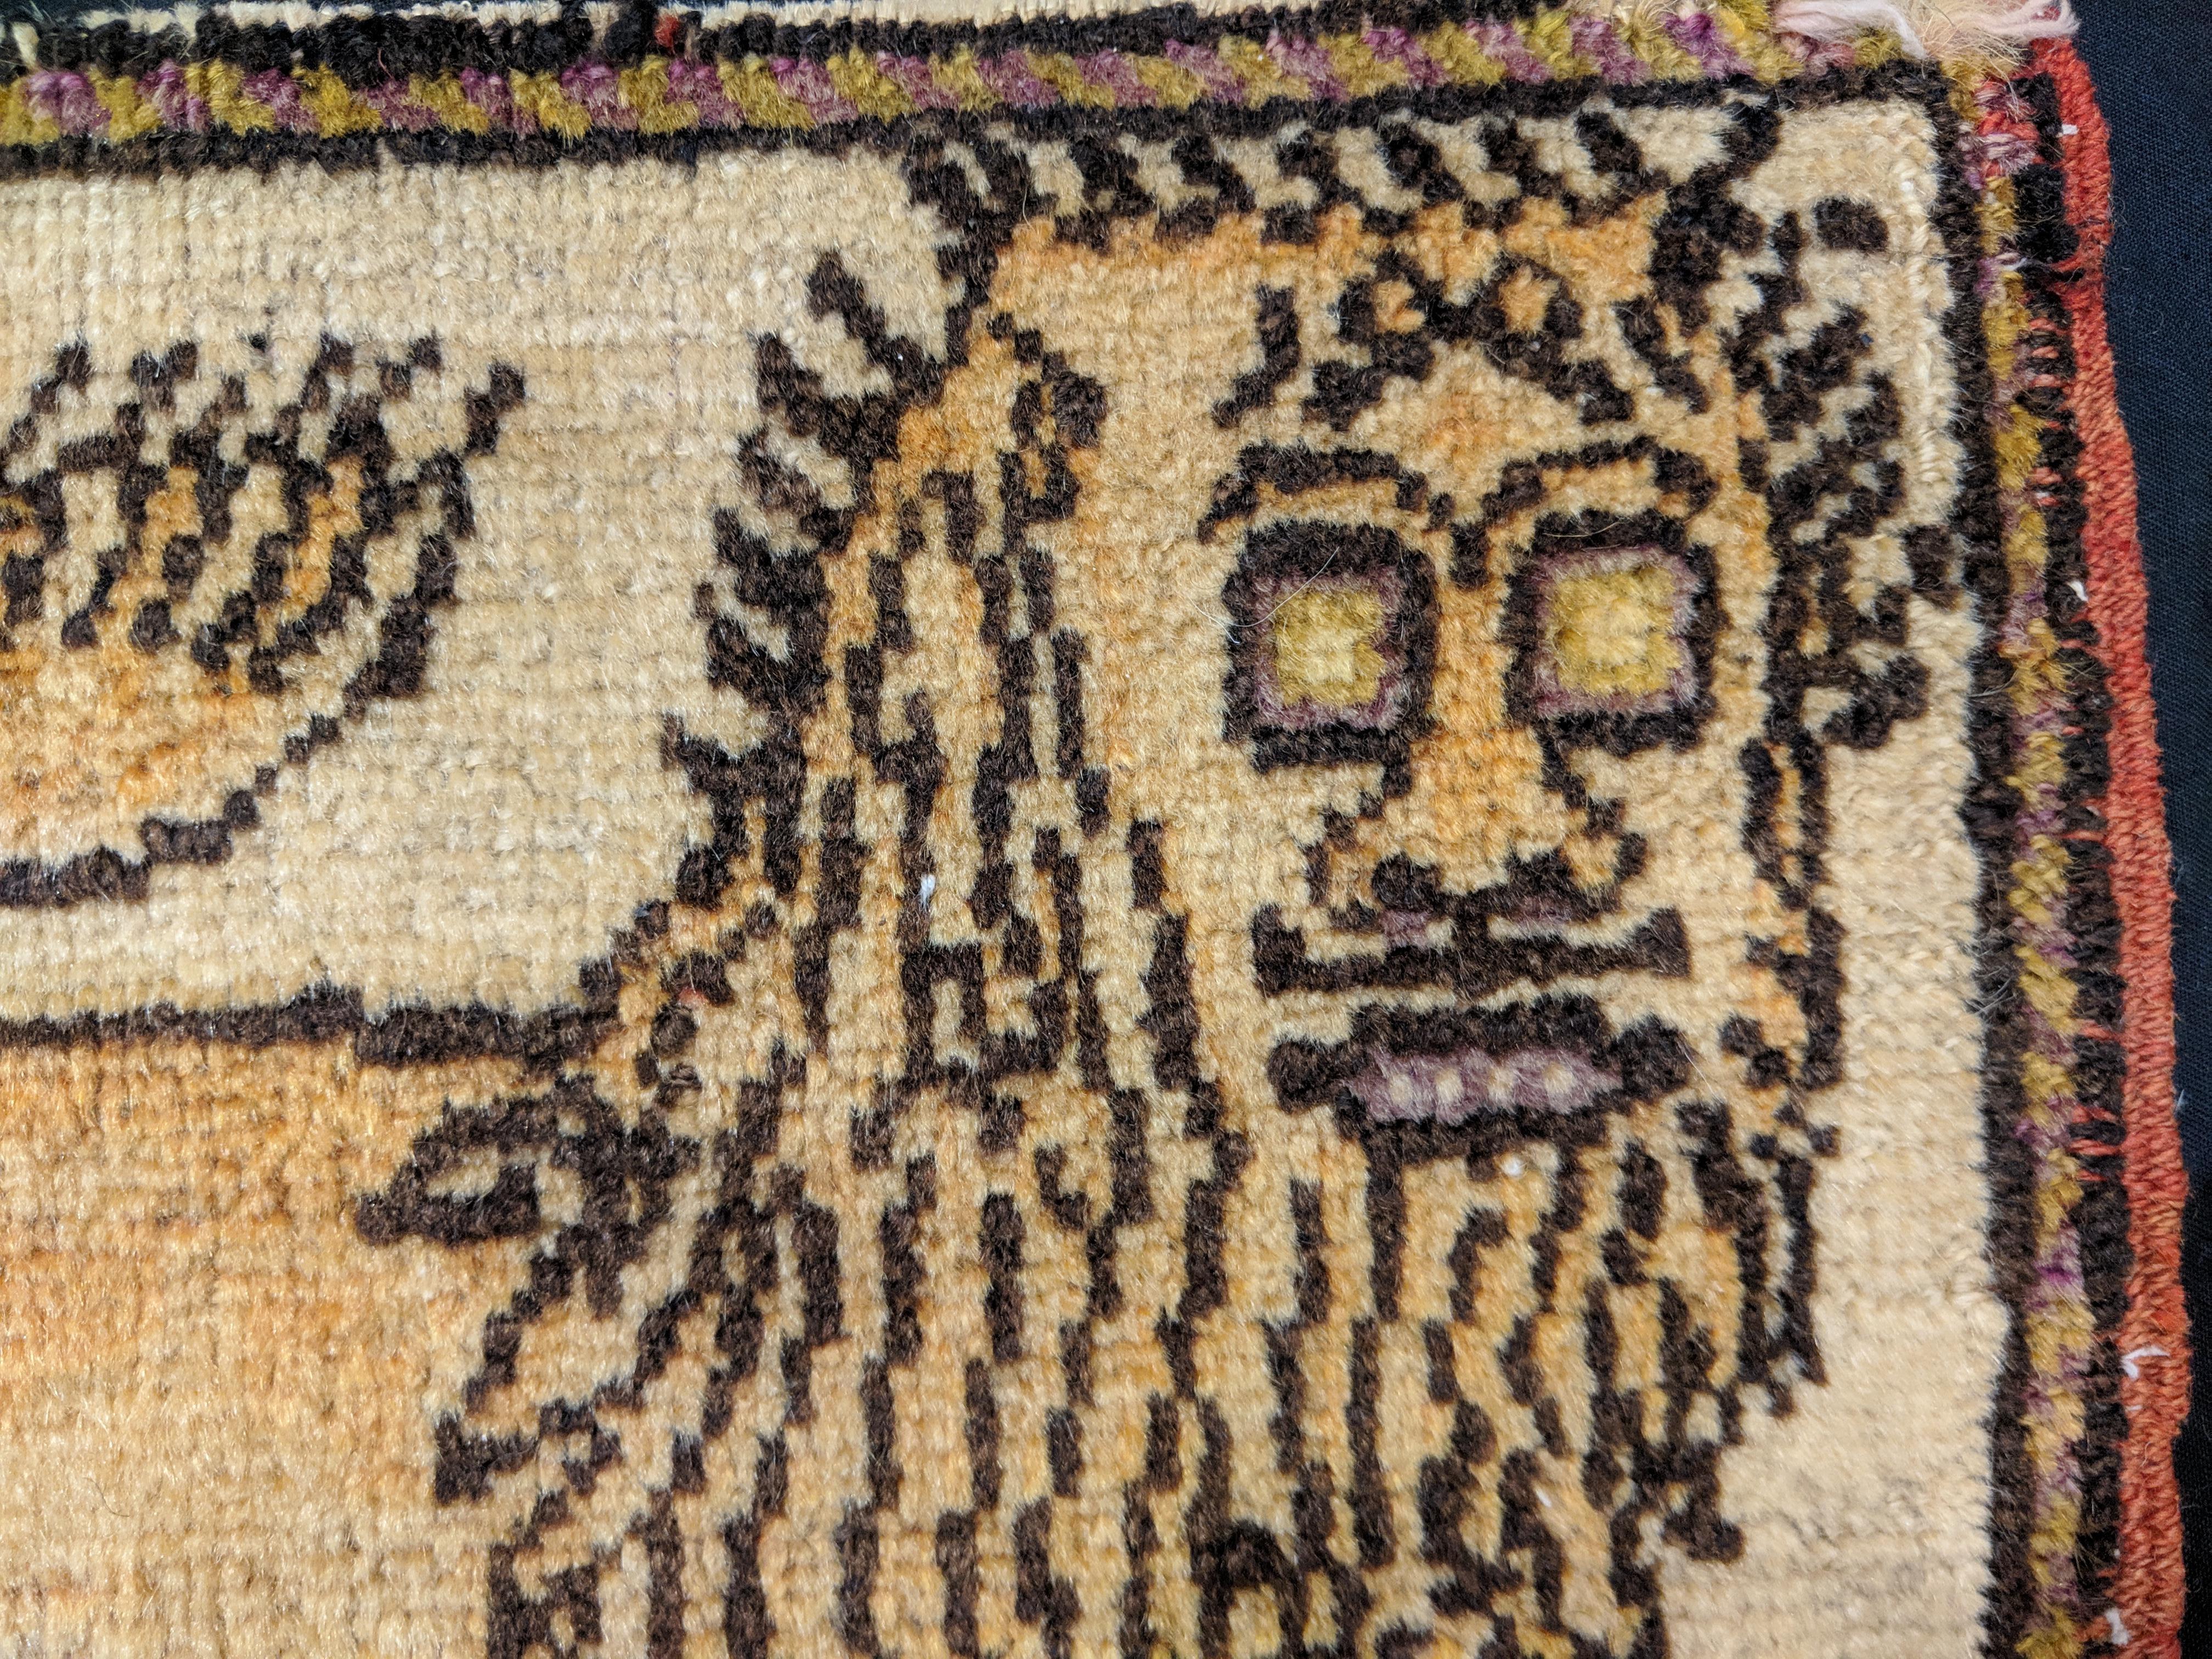 A truly unique miniature antique Turkish rug, decorated by a realistic-looking lion. Possibly commissioned for a specific occasion, it's the perfect gift for an animal-loving person, as well as for someone whose Zodiac sign is Leo.
Conserved on a